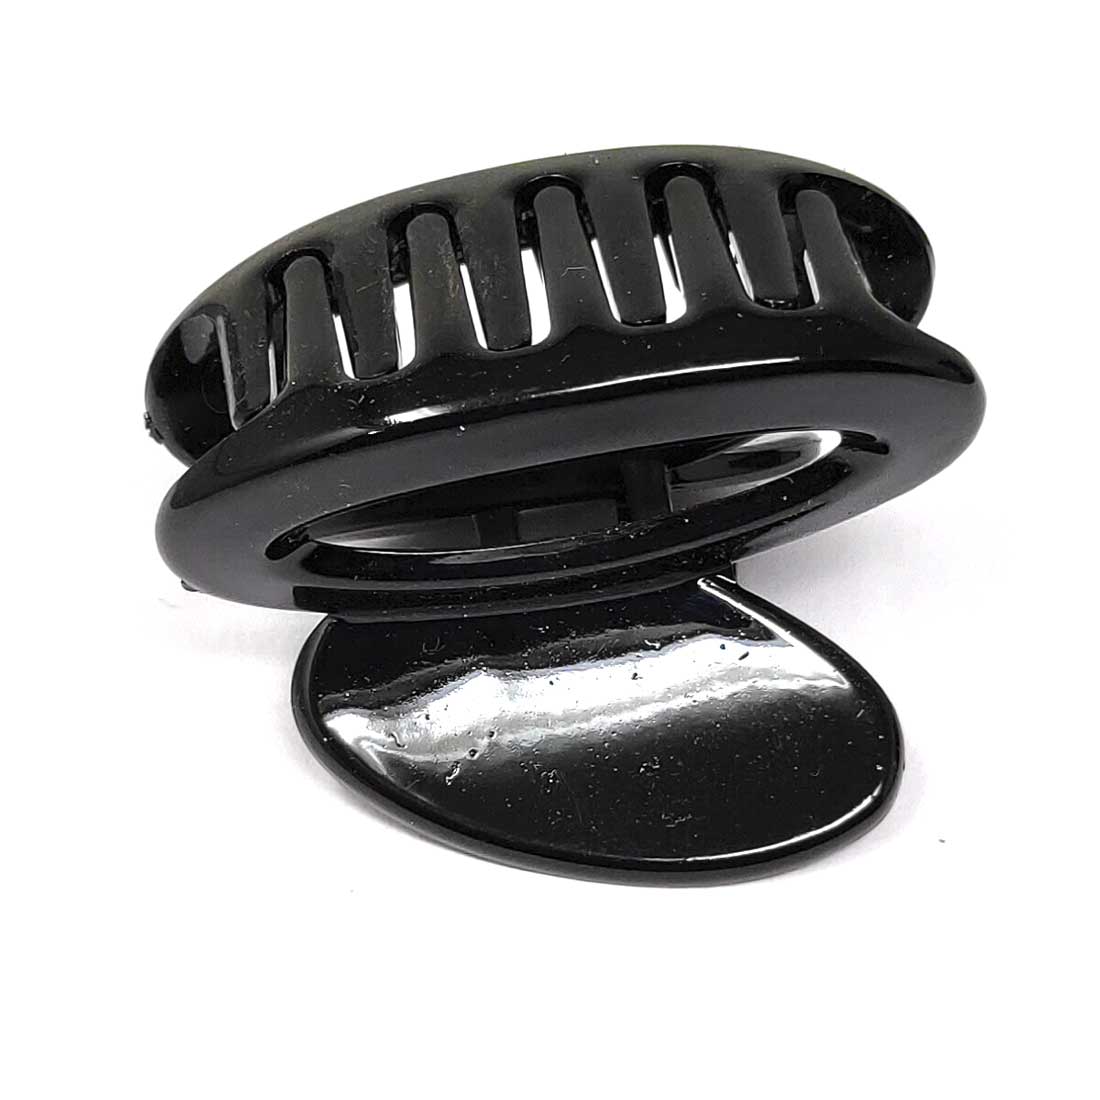 Anokhi Ada Plastic Hair Clutcher/Hair Claw Clip for Girls and Women (Black, Pack of 2) - 01-11C